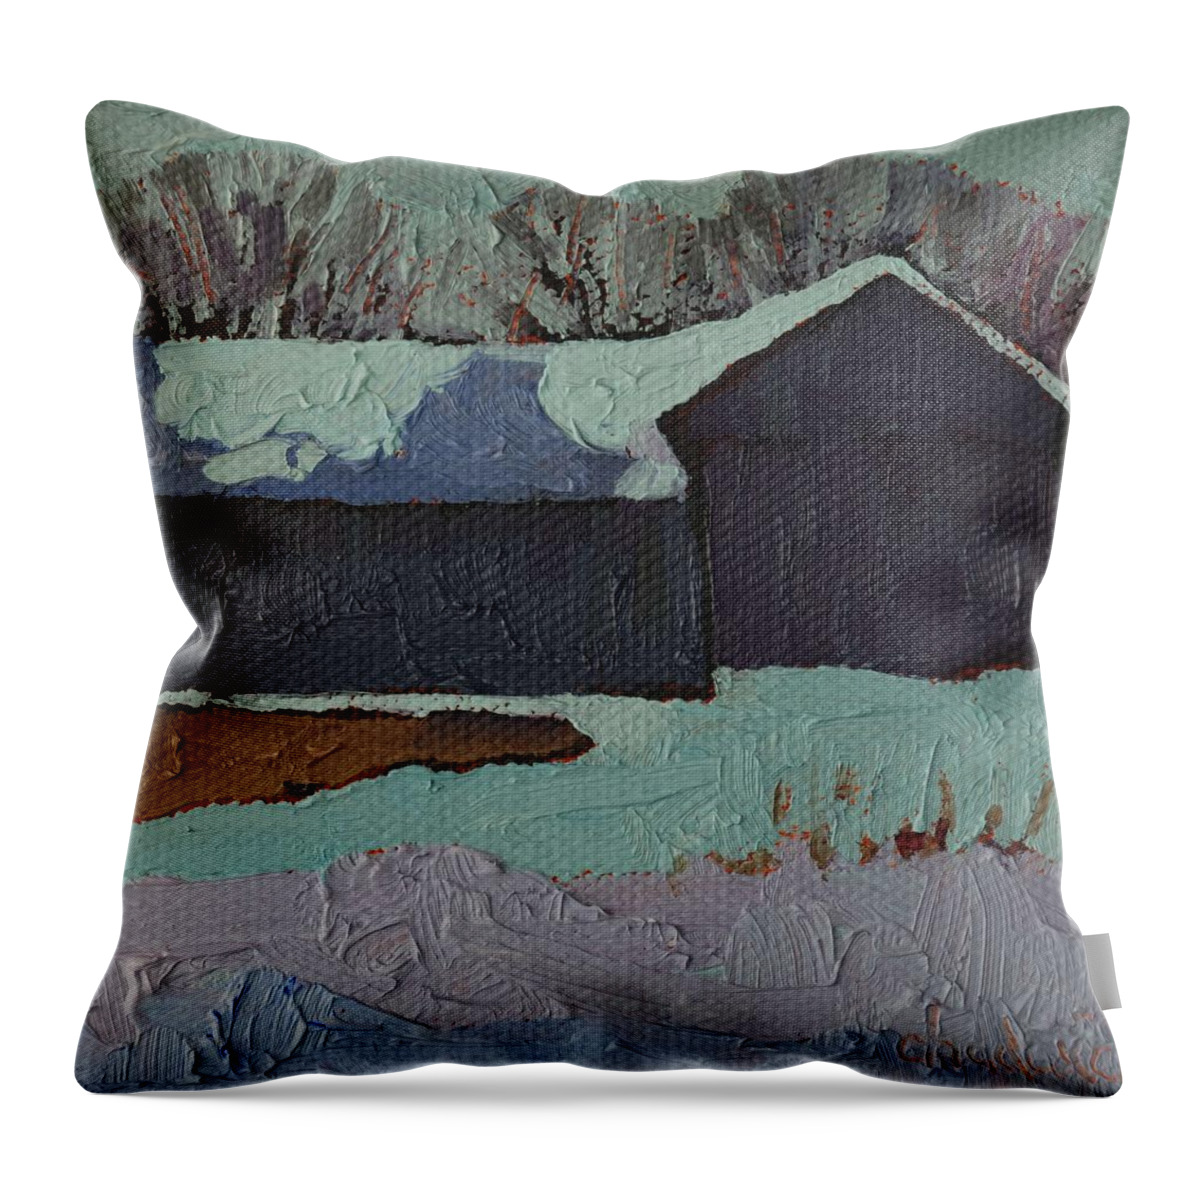 Chadwick Throw Pillow featuring the painting Foley Mountain Farm by Phil Chadwick